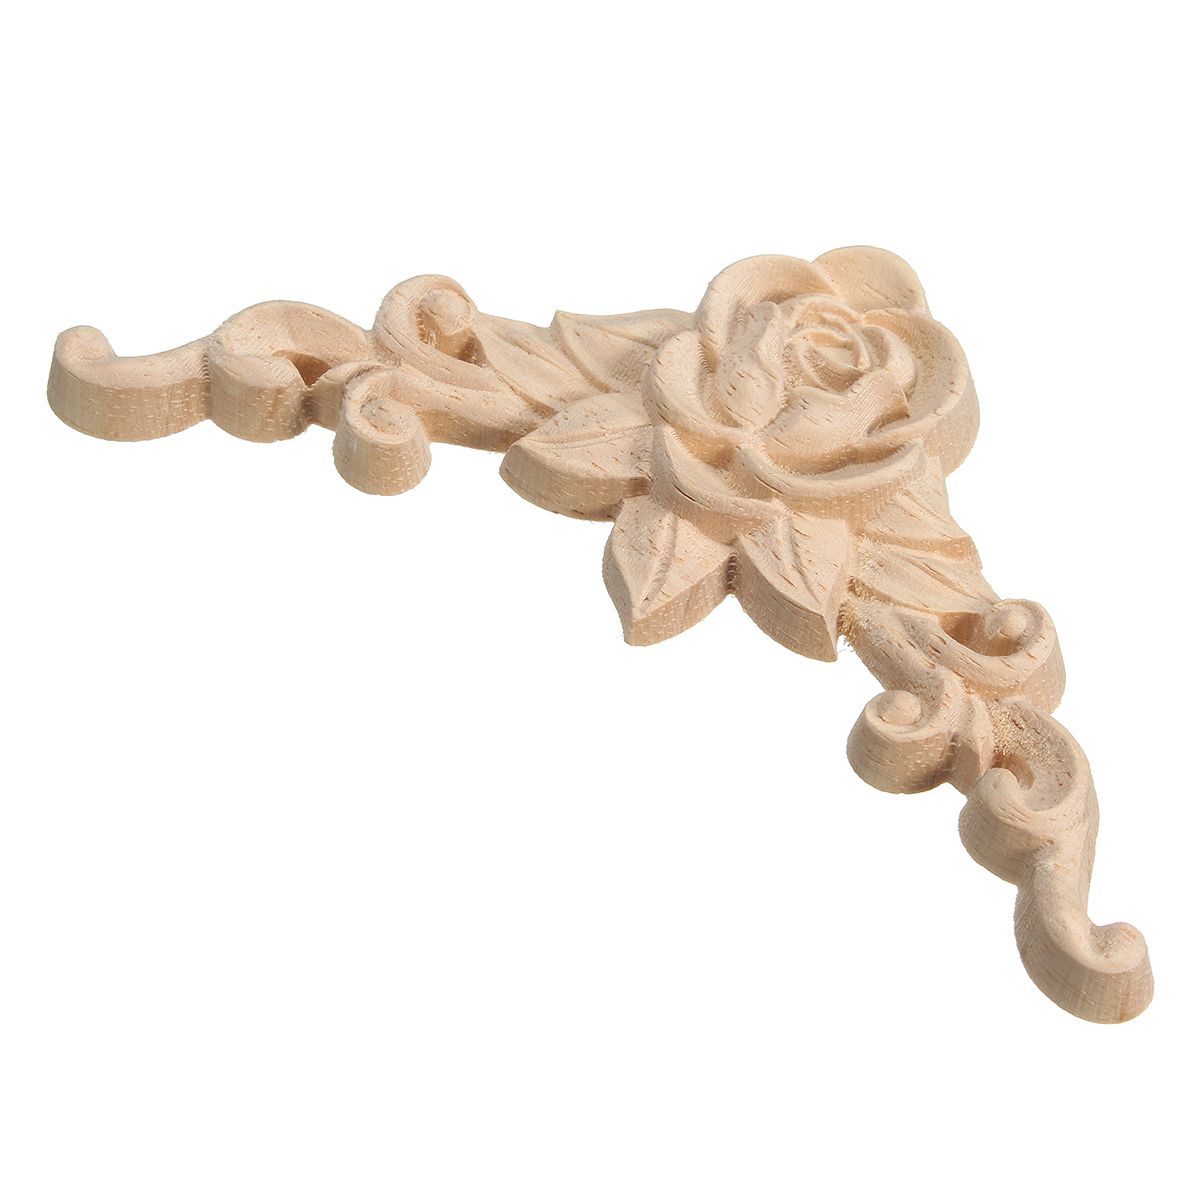 Wood-Carving-Applique-Unpainted-Flower-Applique-Wood-Carving-Decal-for-Furniture-Cabinet-8x8cm-1162704